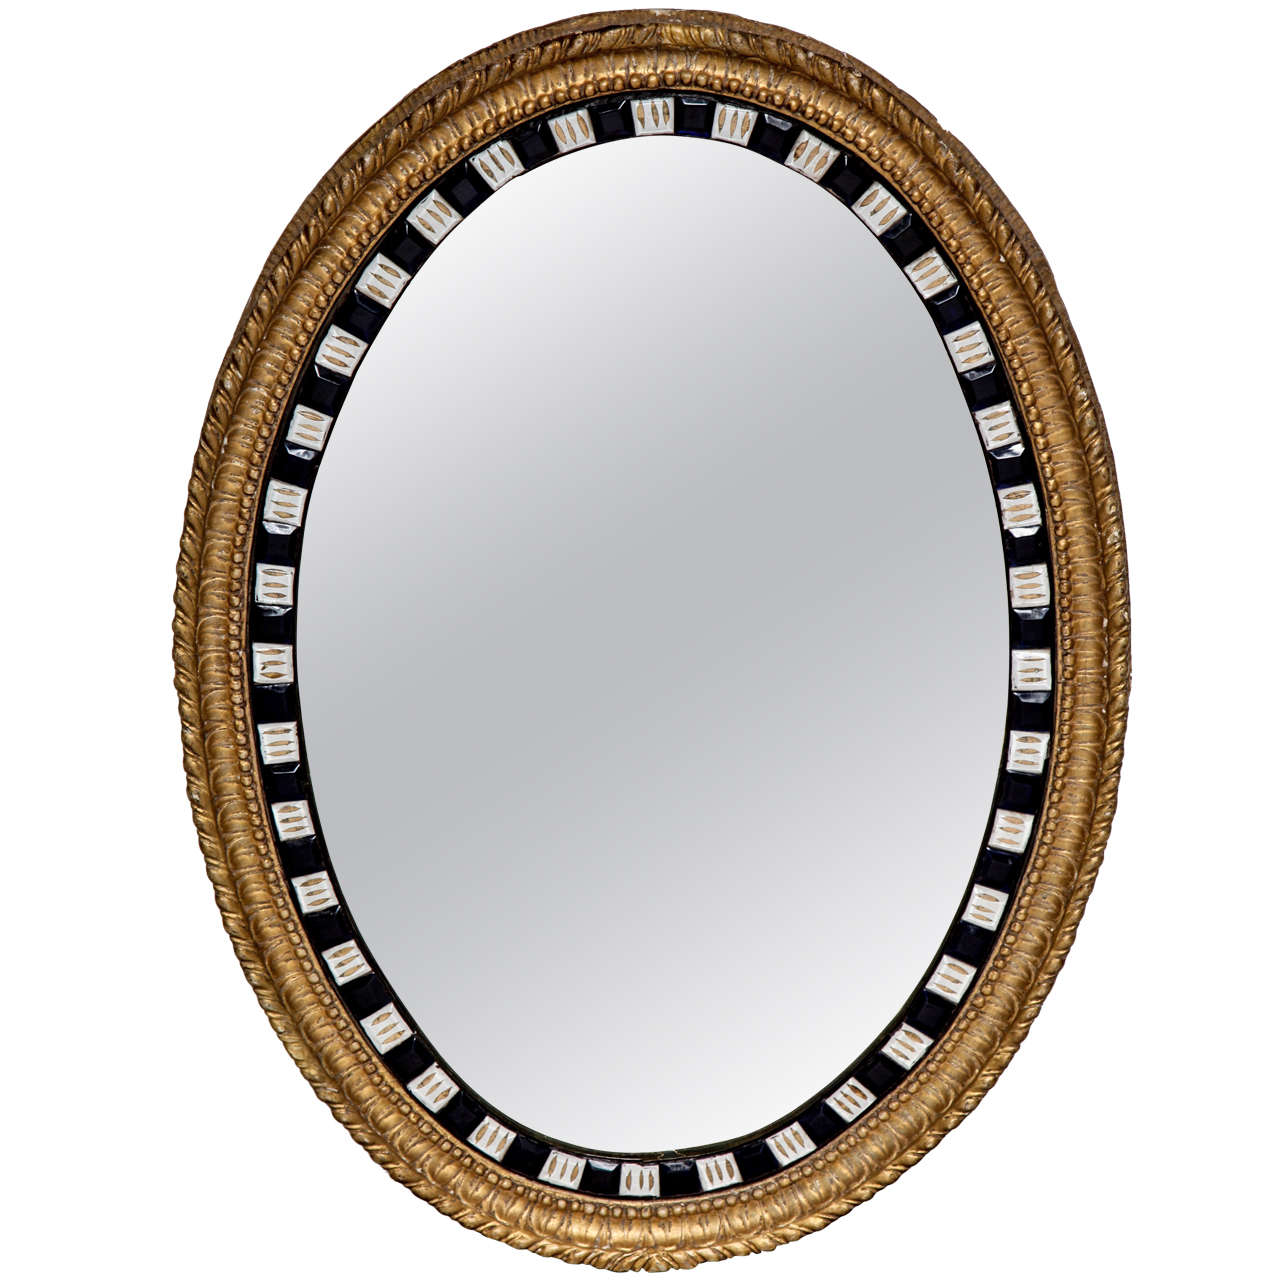 19th Century Irish Lozenge Mirror with Oval Looking Glass in a Gilded Frame For Sale